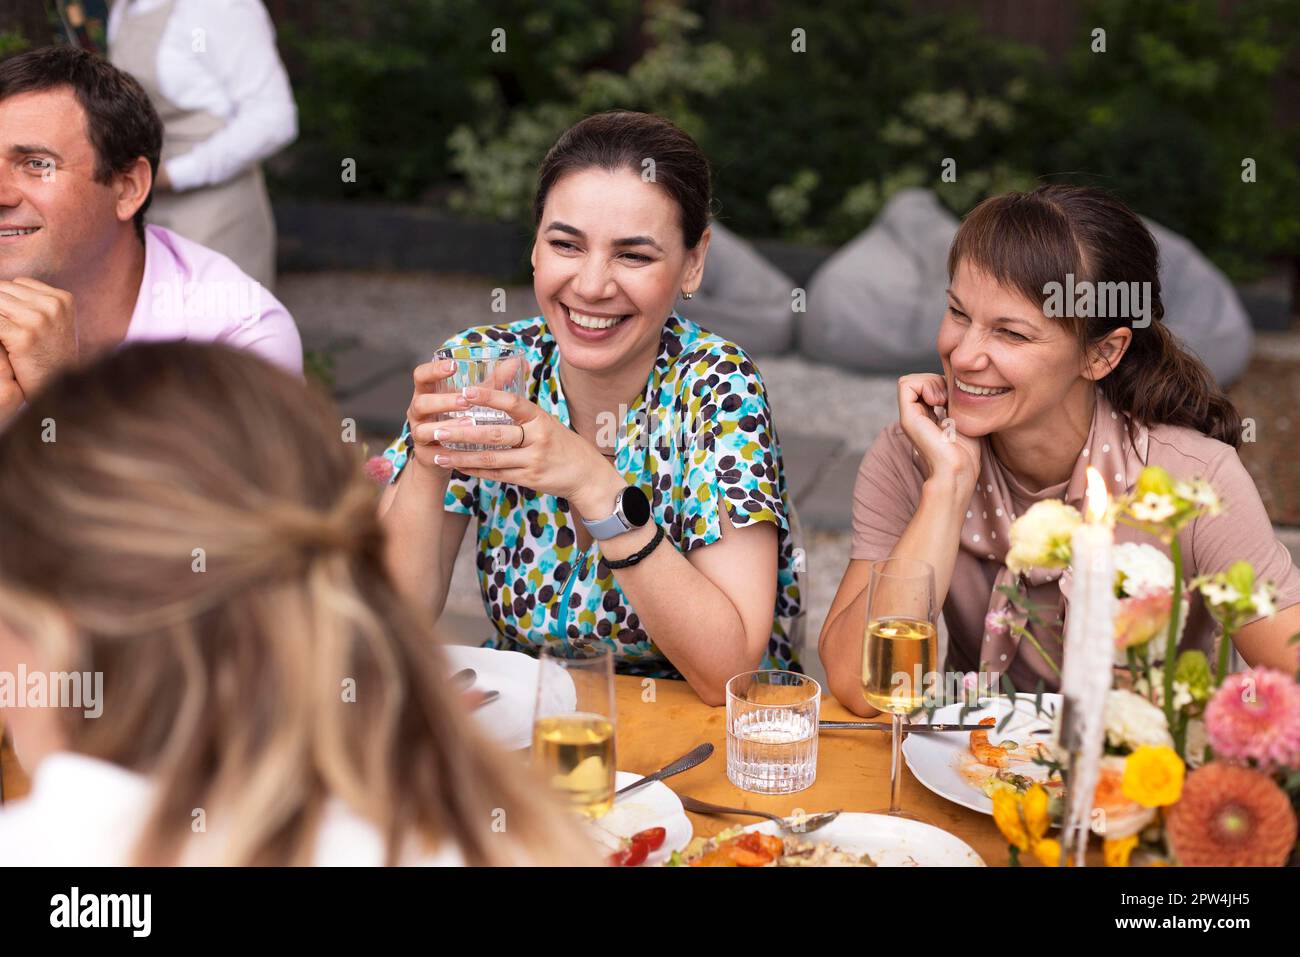 Many people saying cheers and showing their champagne glasses full of sparkling wine to each other whilst enjoying an outdoor wedding party on a Stock Photo